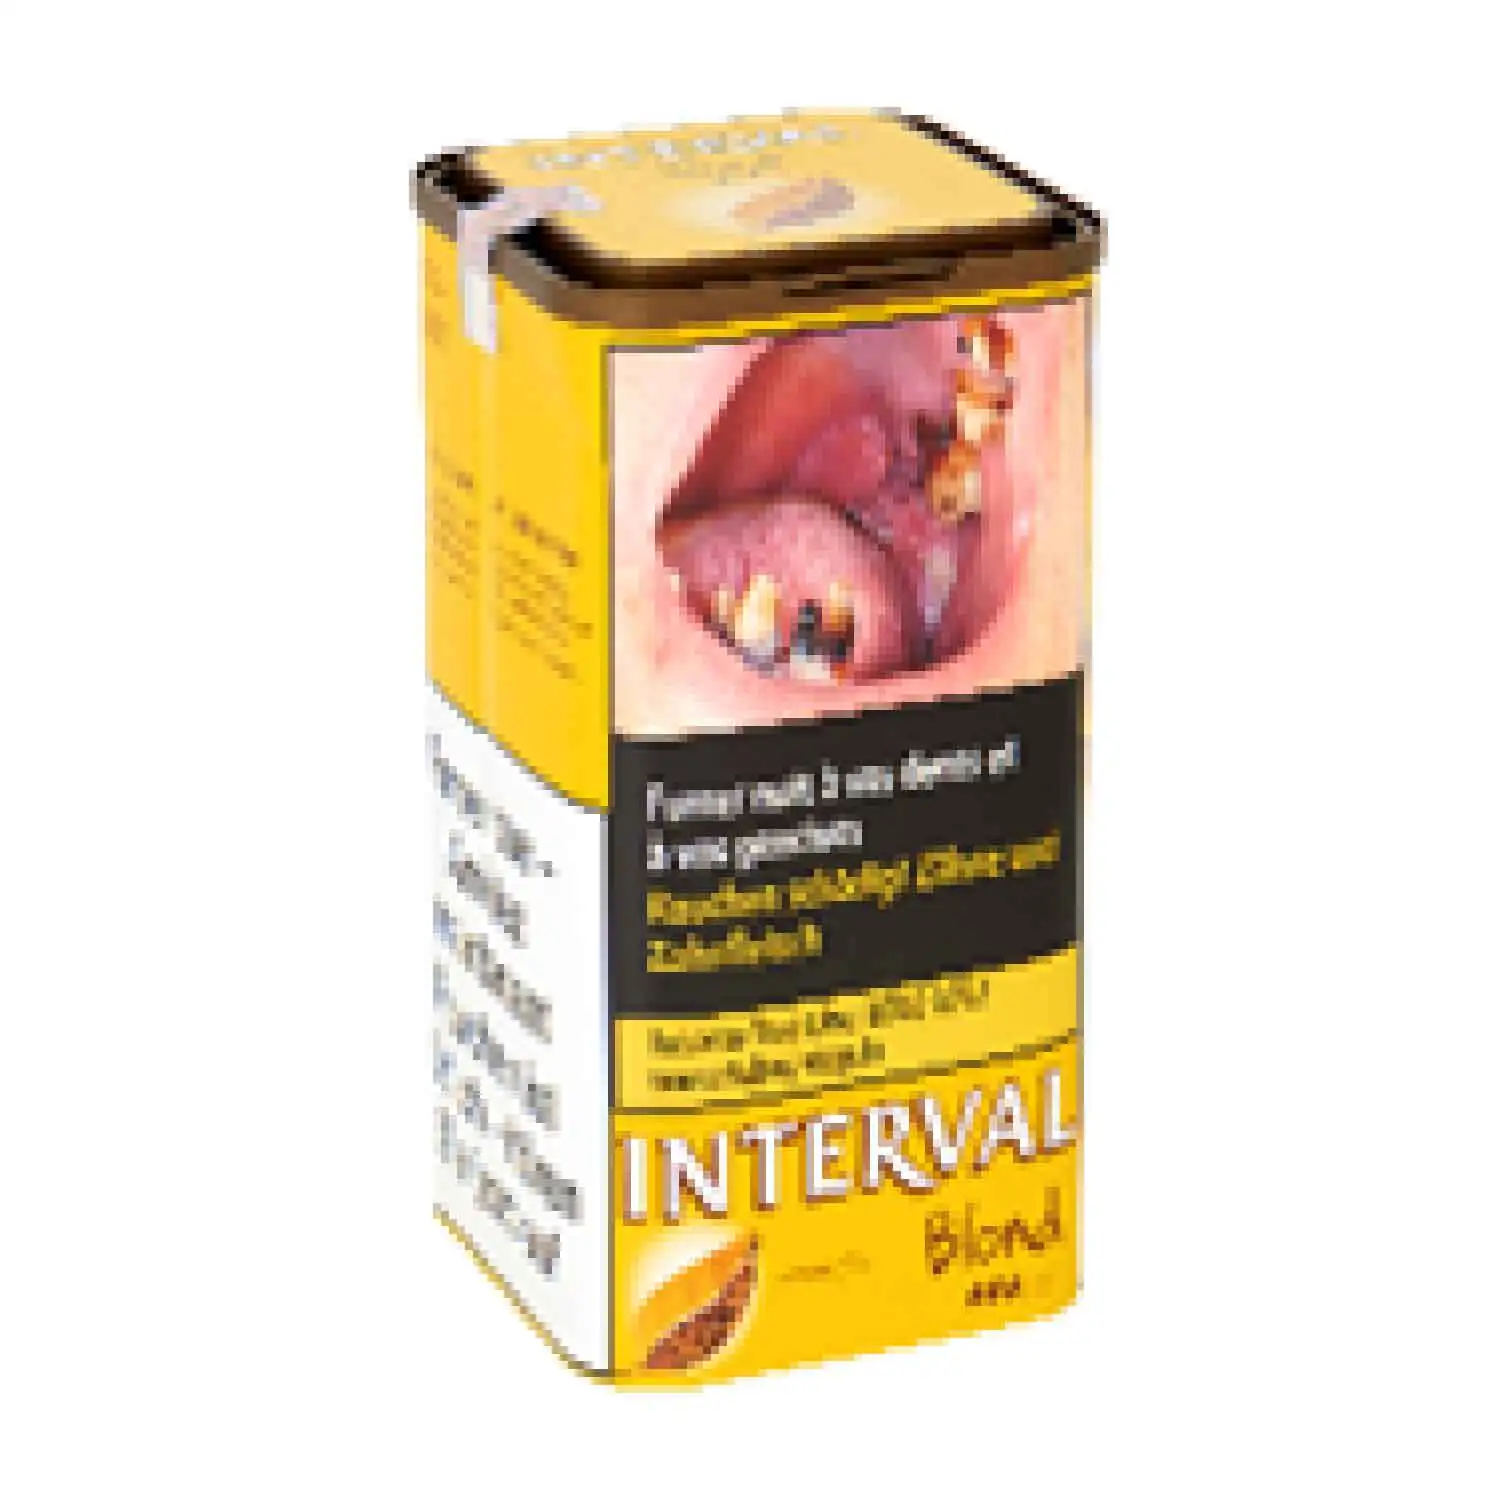 Interval blonde 250g - Buy at Real Tobacco